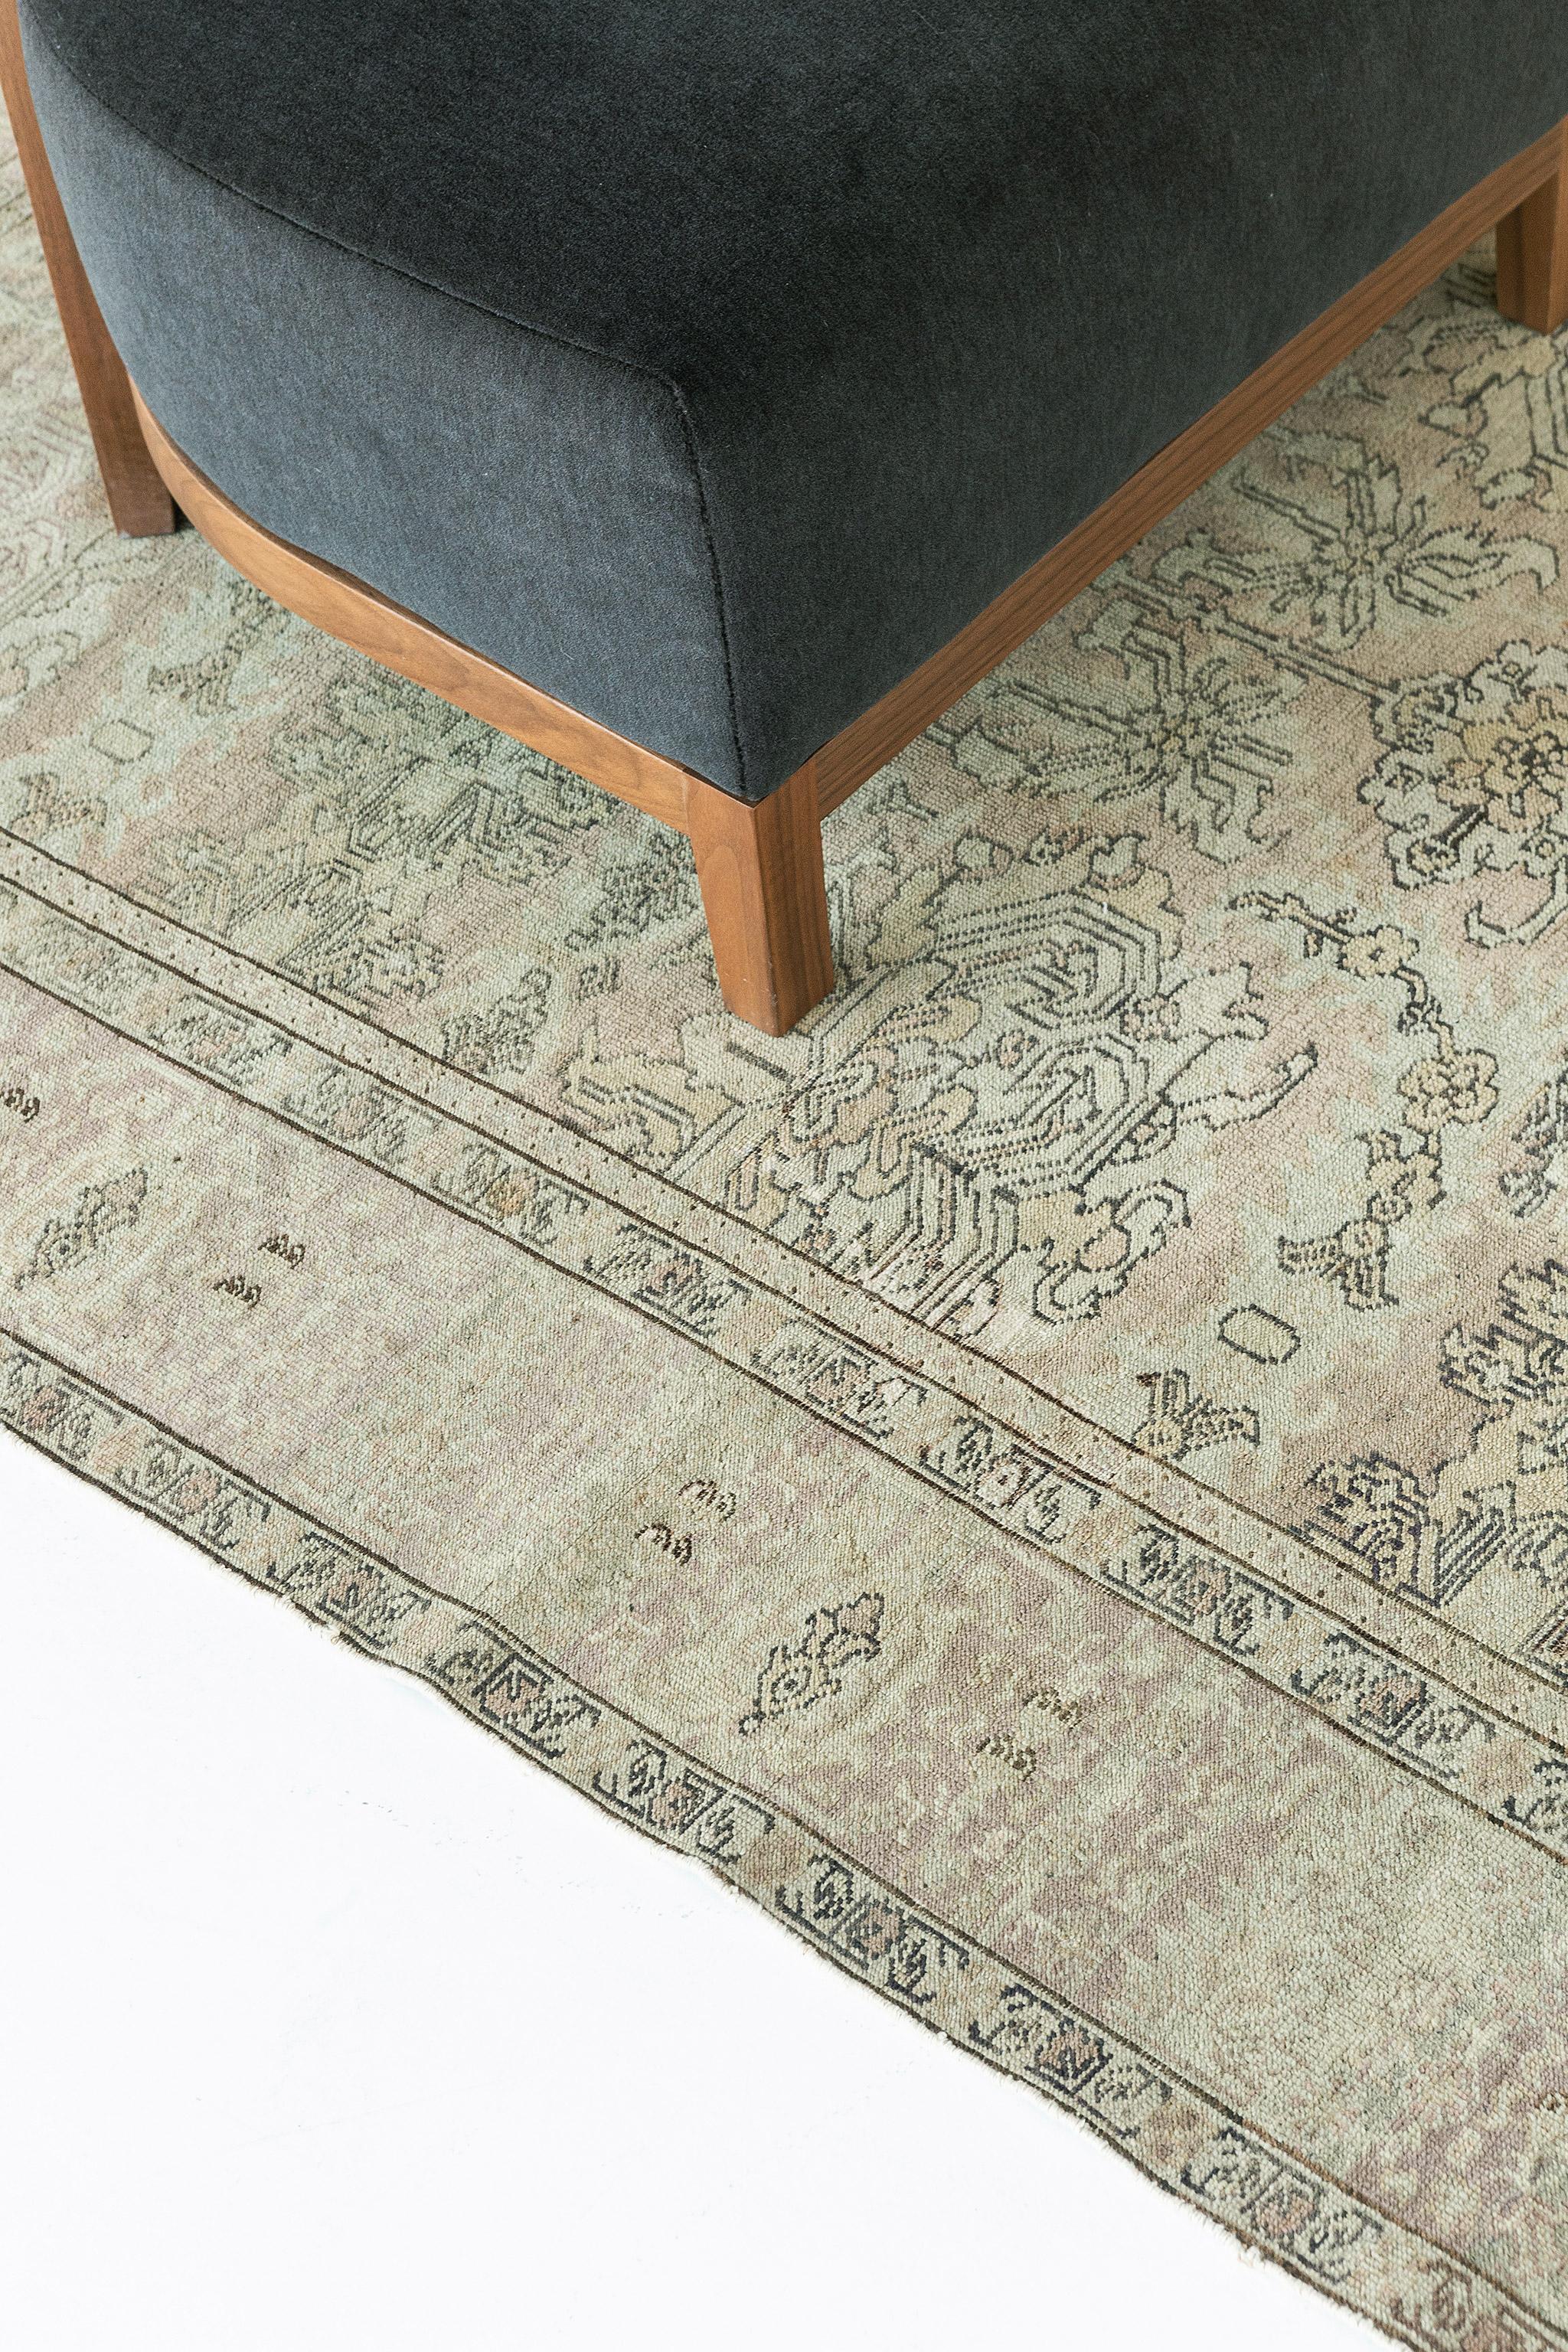 A stylish Oushak revival rug in the muted tones of terracotta and sandy beige stylized gracefully with majestic botanical details. Classic, calm and cozy, this rug from hand spun wool is framed by a complementary border filled with elements that